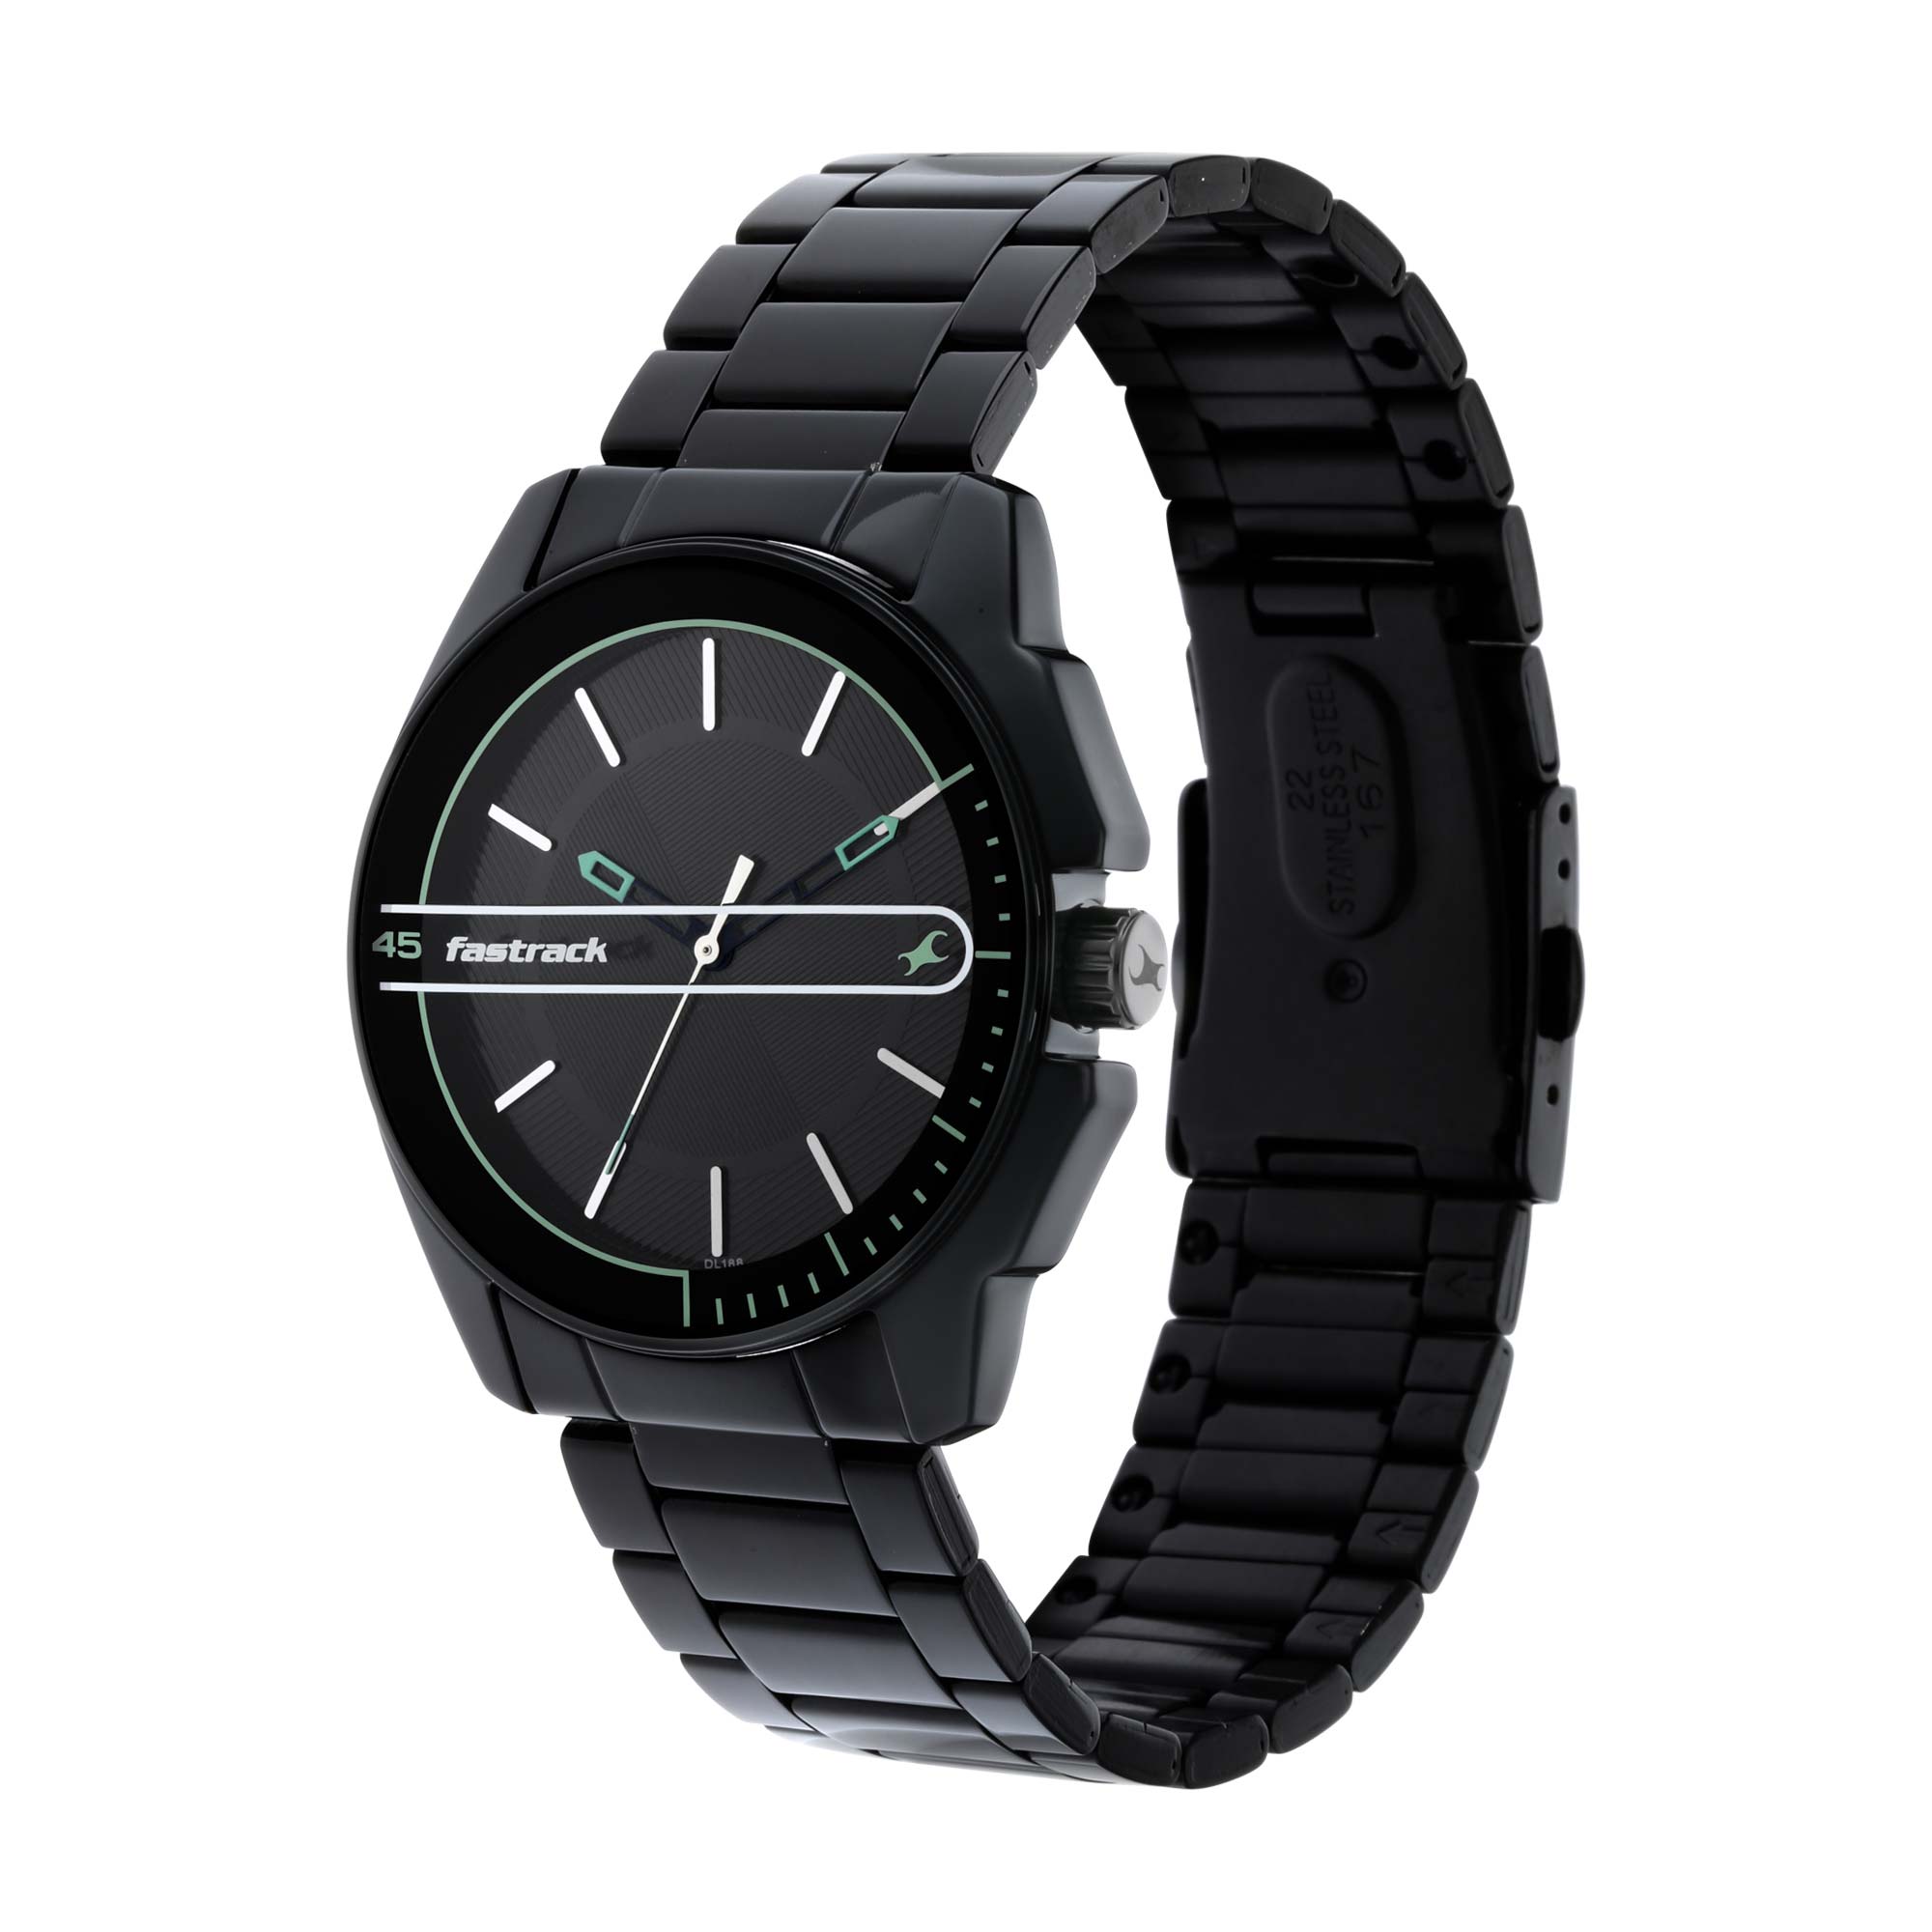 Fastrack Wear Your Look Quartz Analog Black Dial Metal Strap Watch for Guys